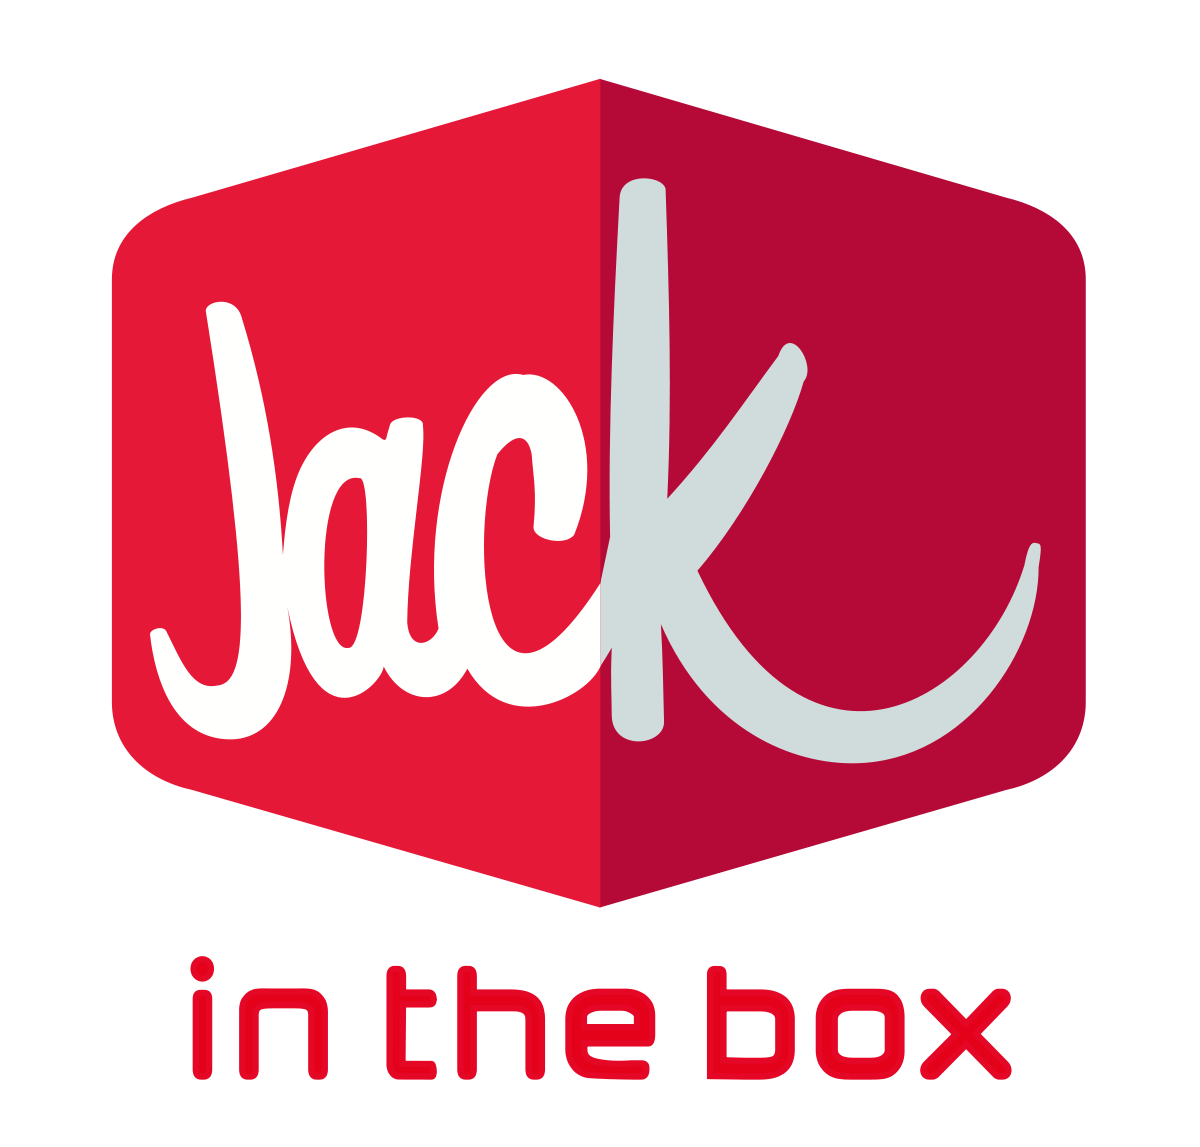 White Dog with a Red Box Logo - Jack in the Box